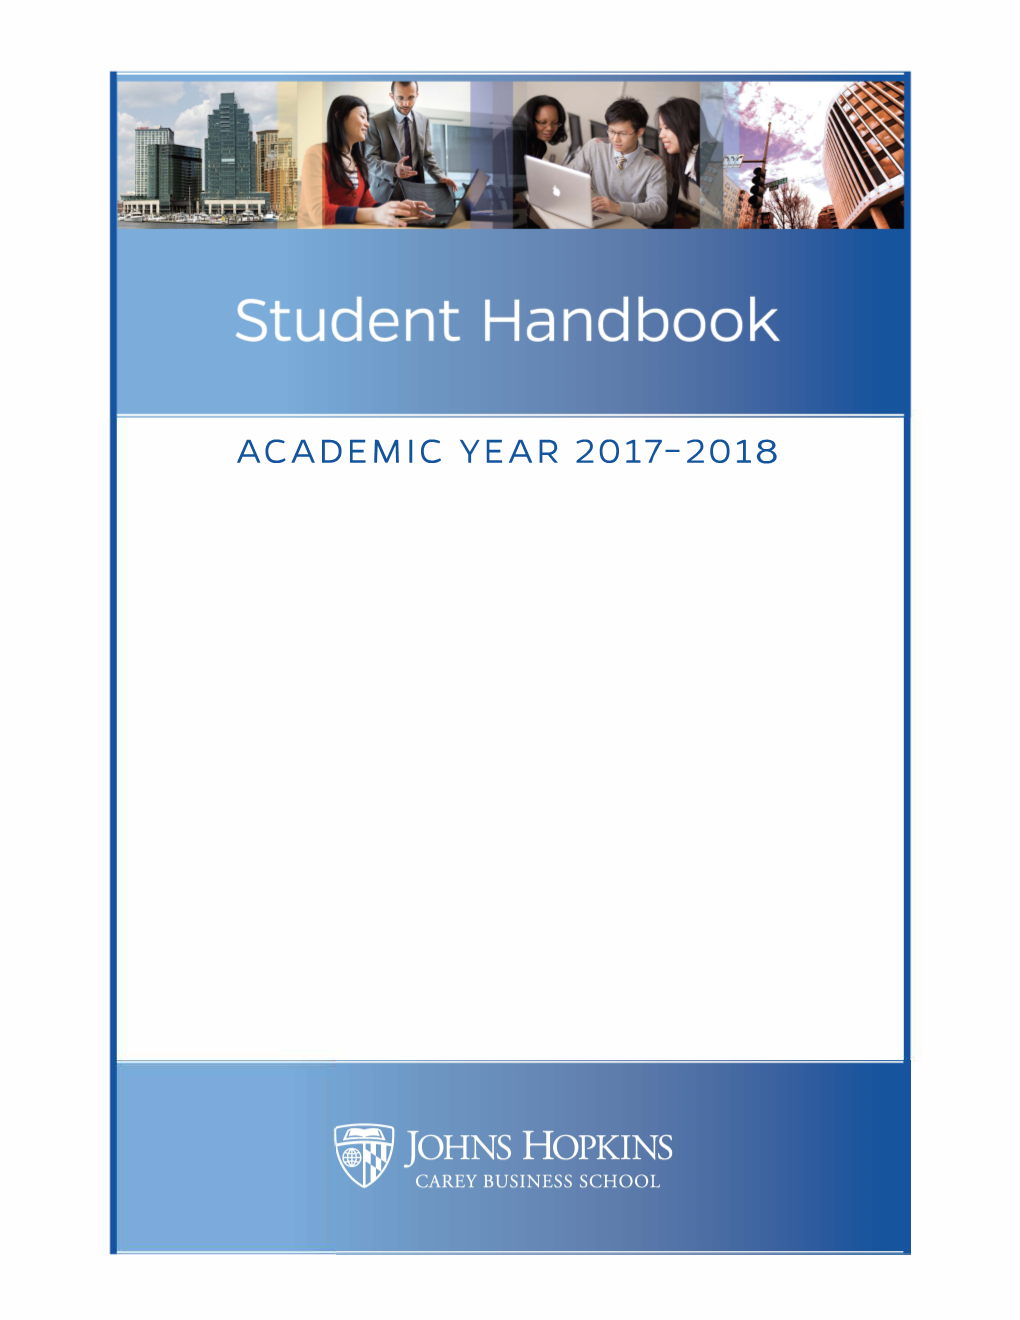 ACADEMIC YEAR 2017-2018 Table of Contents